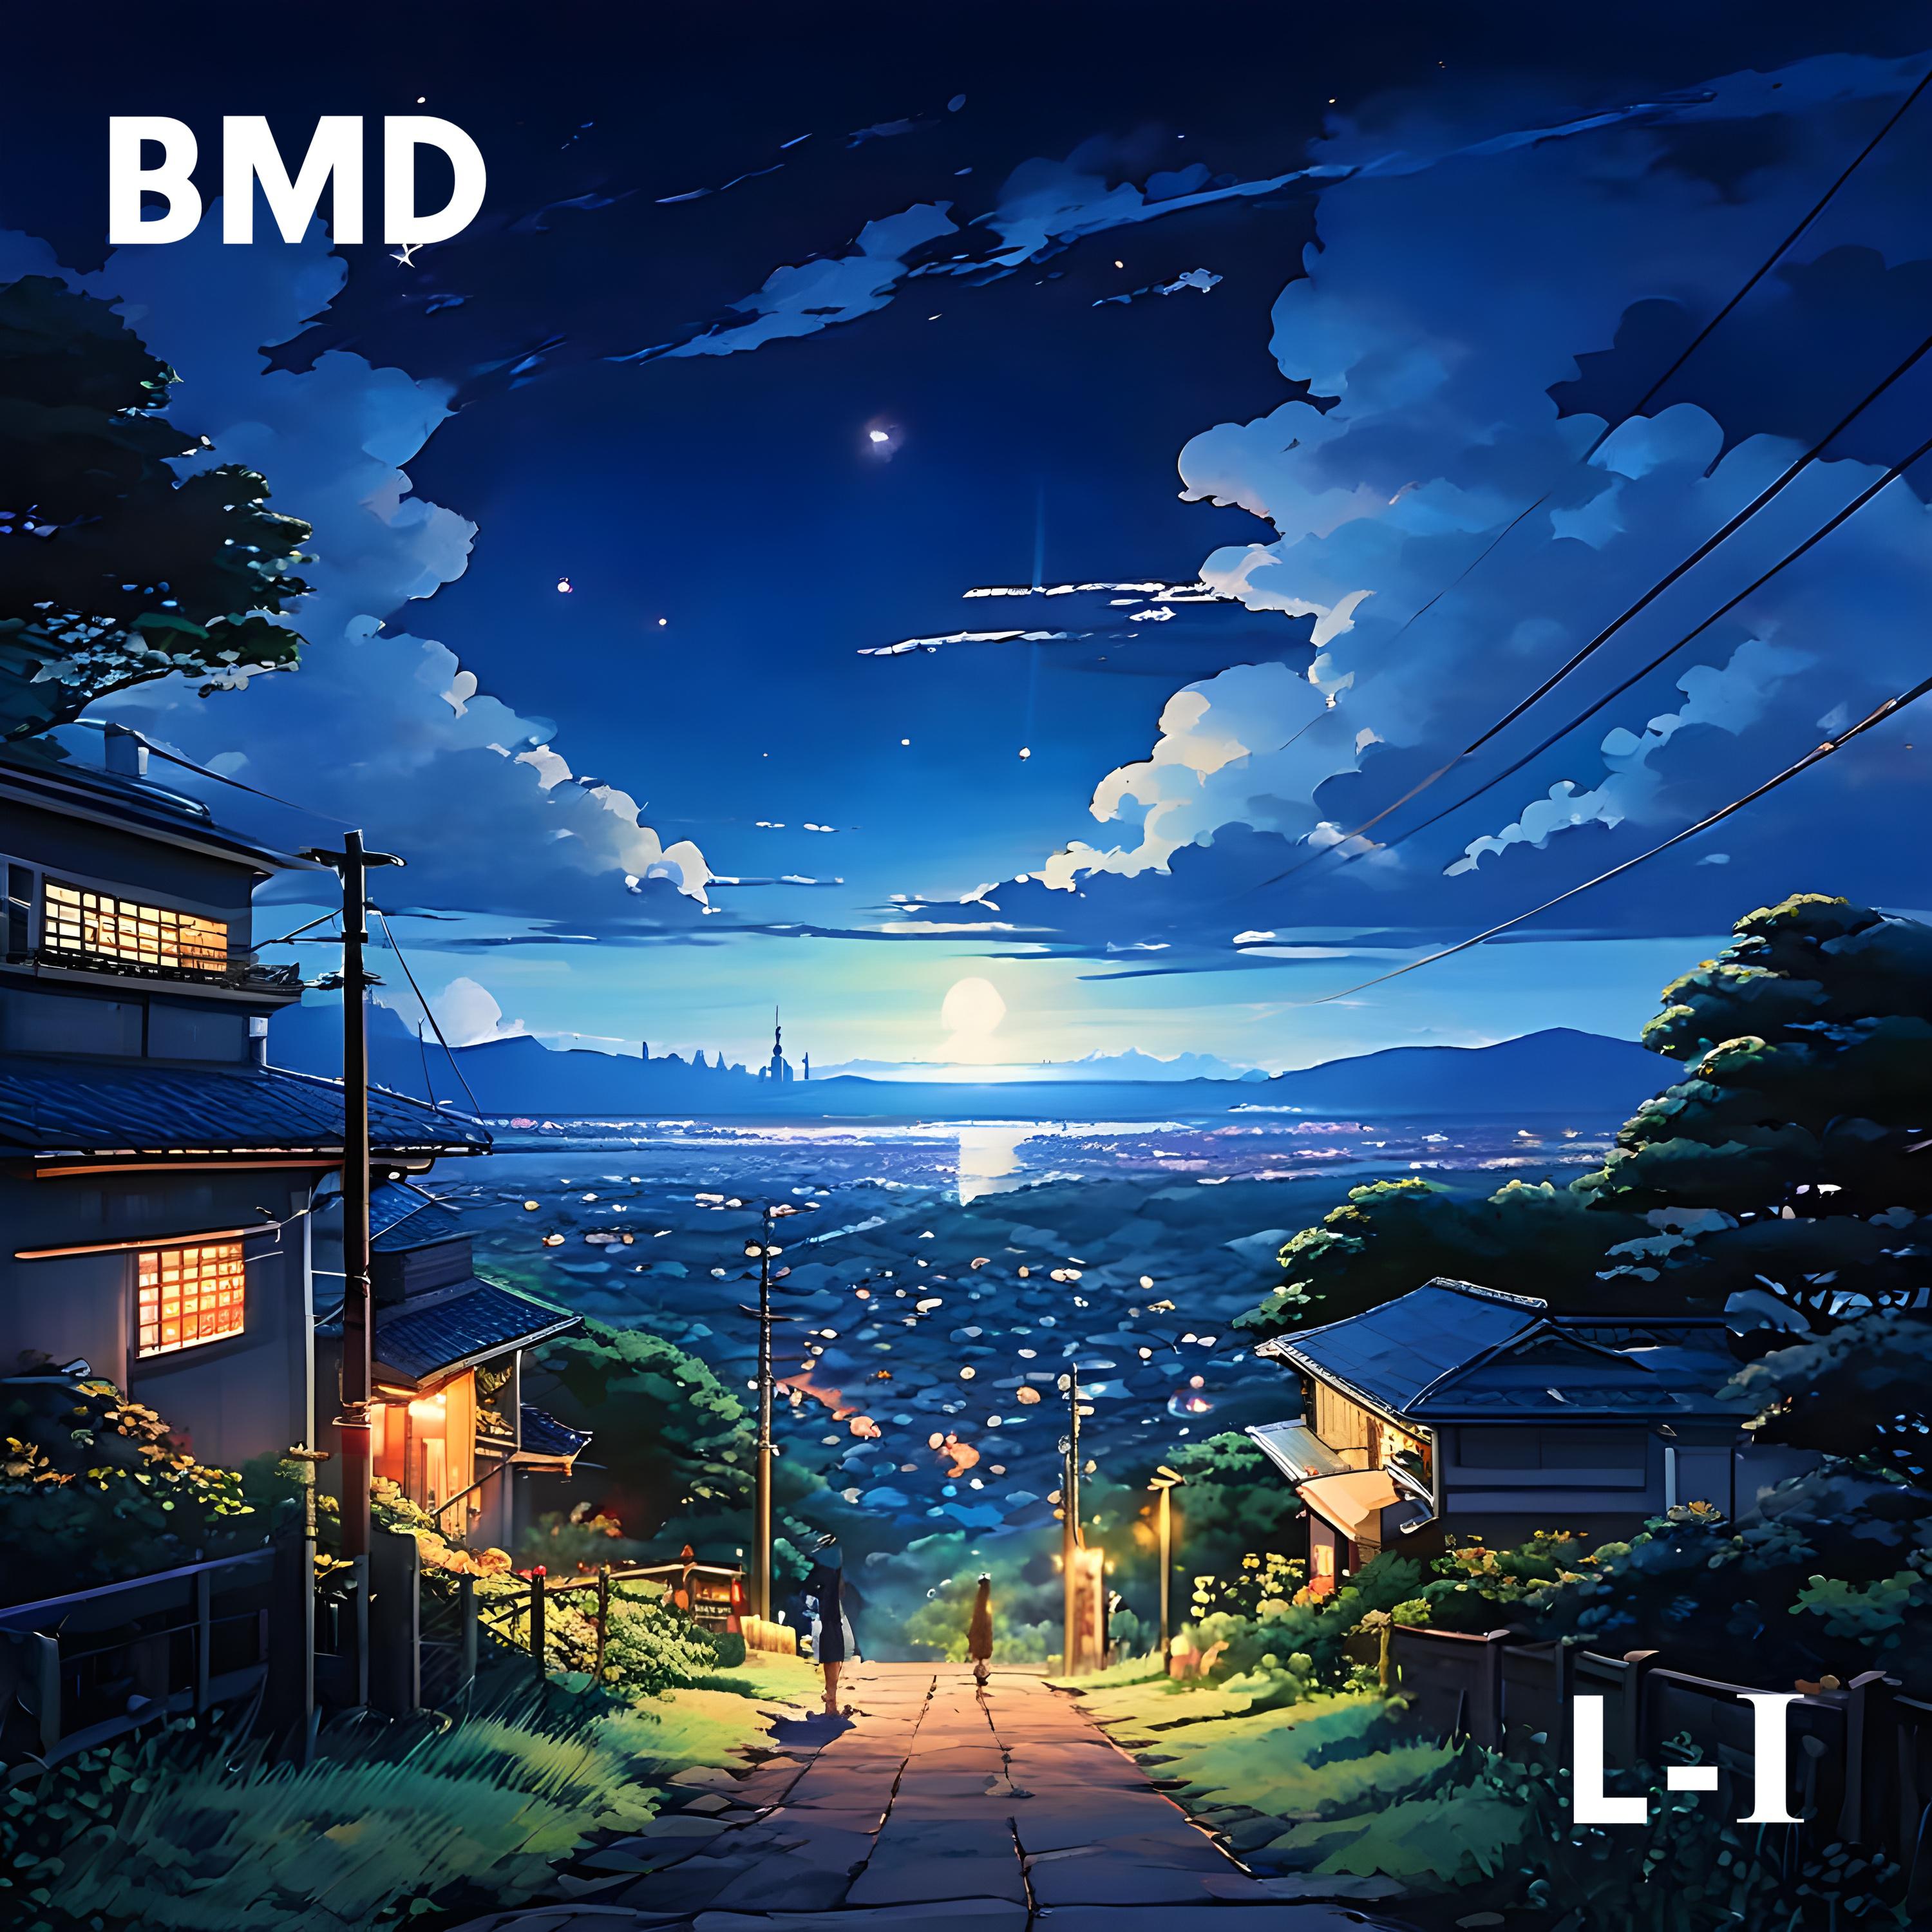 BMD - Forget About It